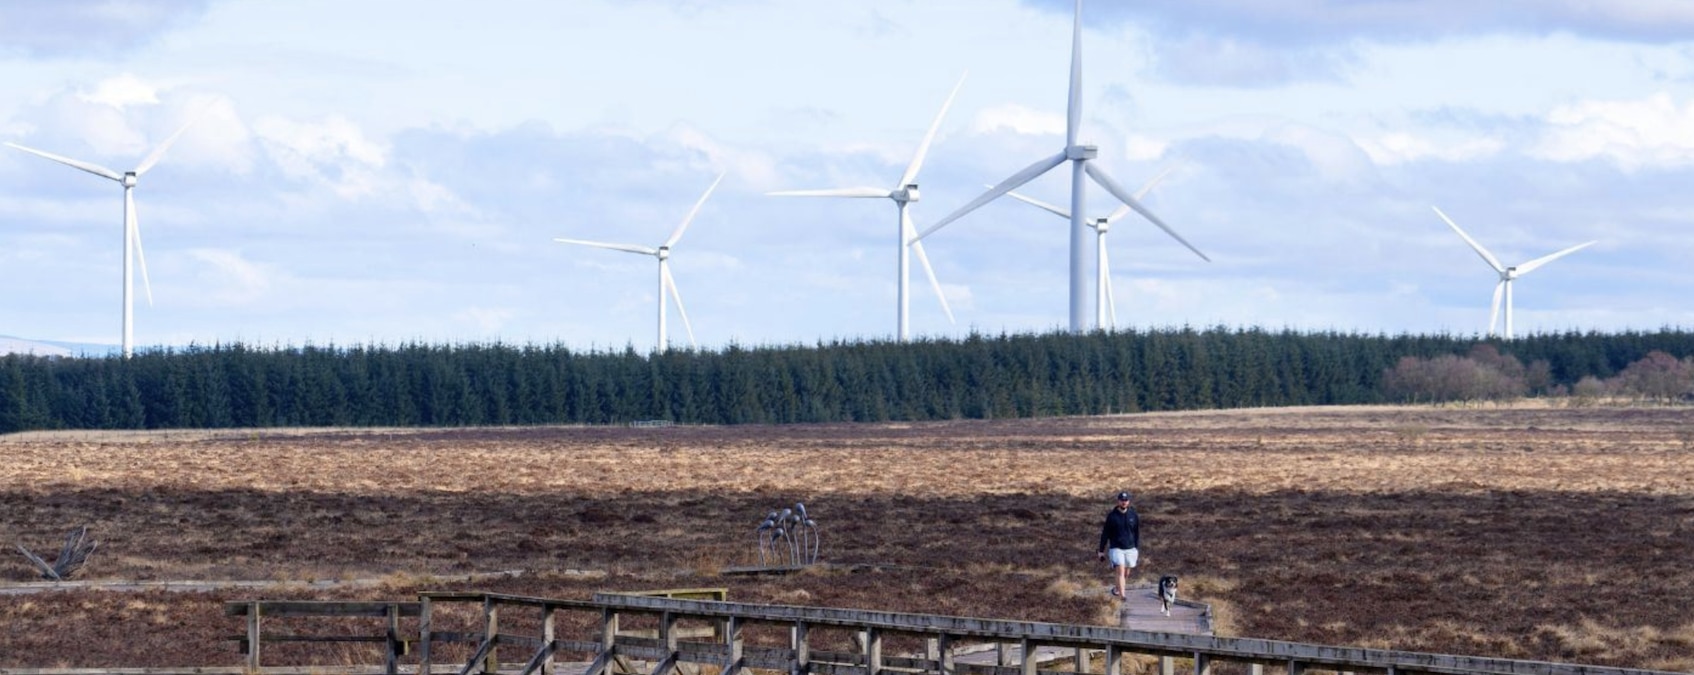 Construction of England's Tallest Onshore Wind Turbine to Begin in February  - EcoWatch